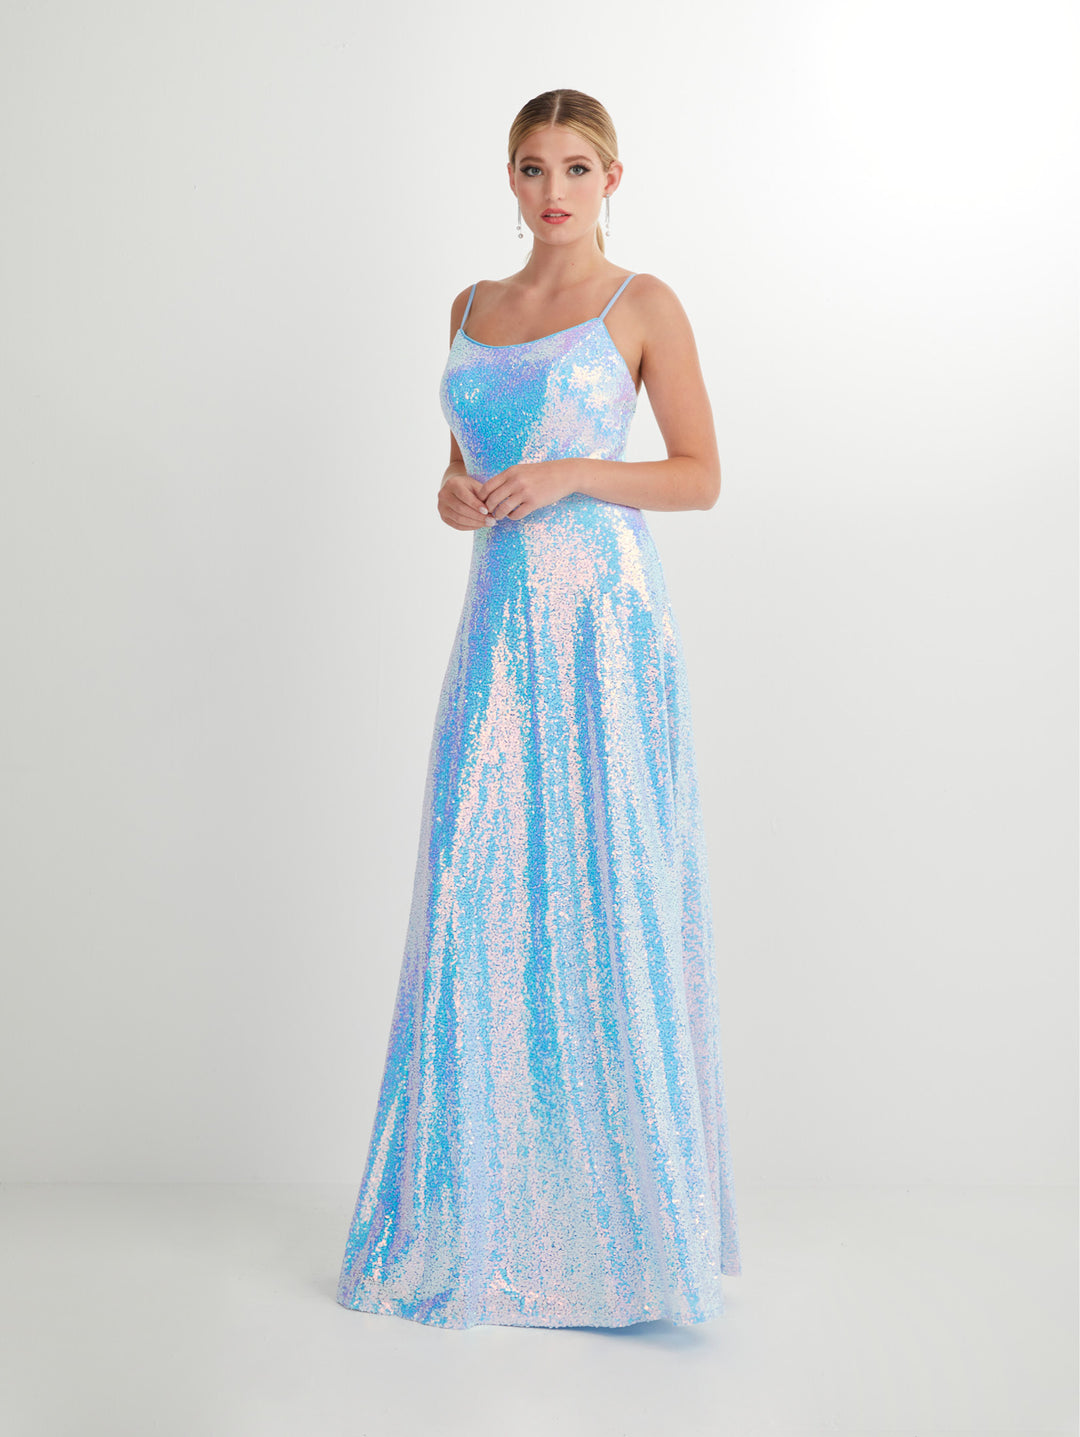 Iridescent Sequin Sleeveless A-line Gown by Studio 17 12915